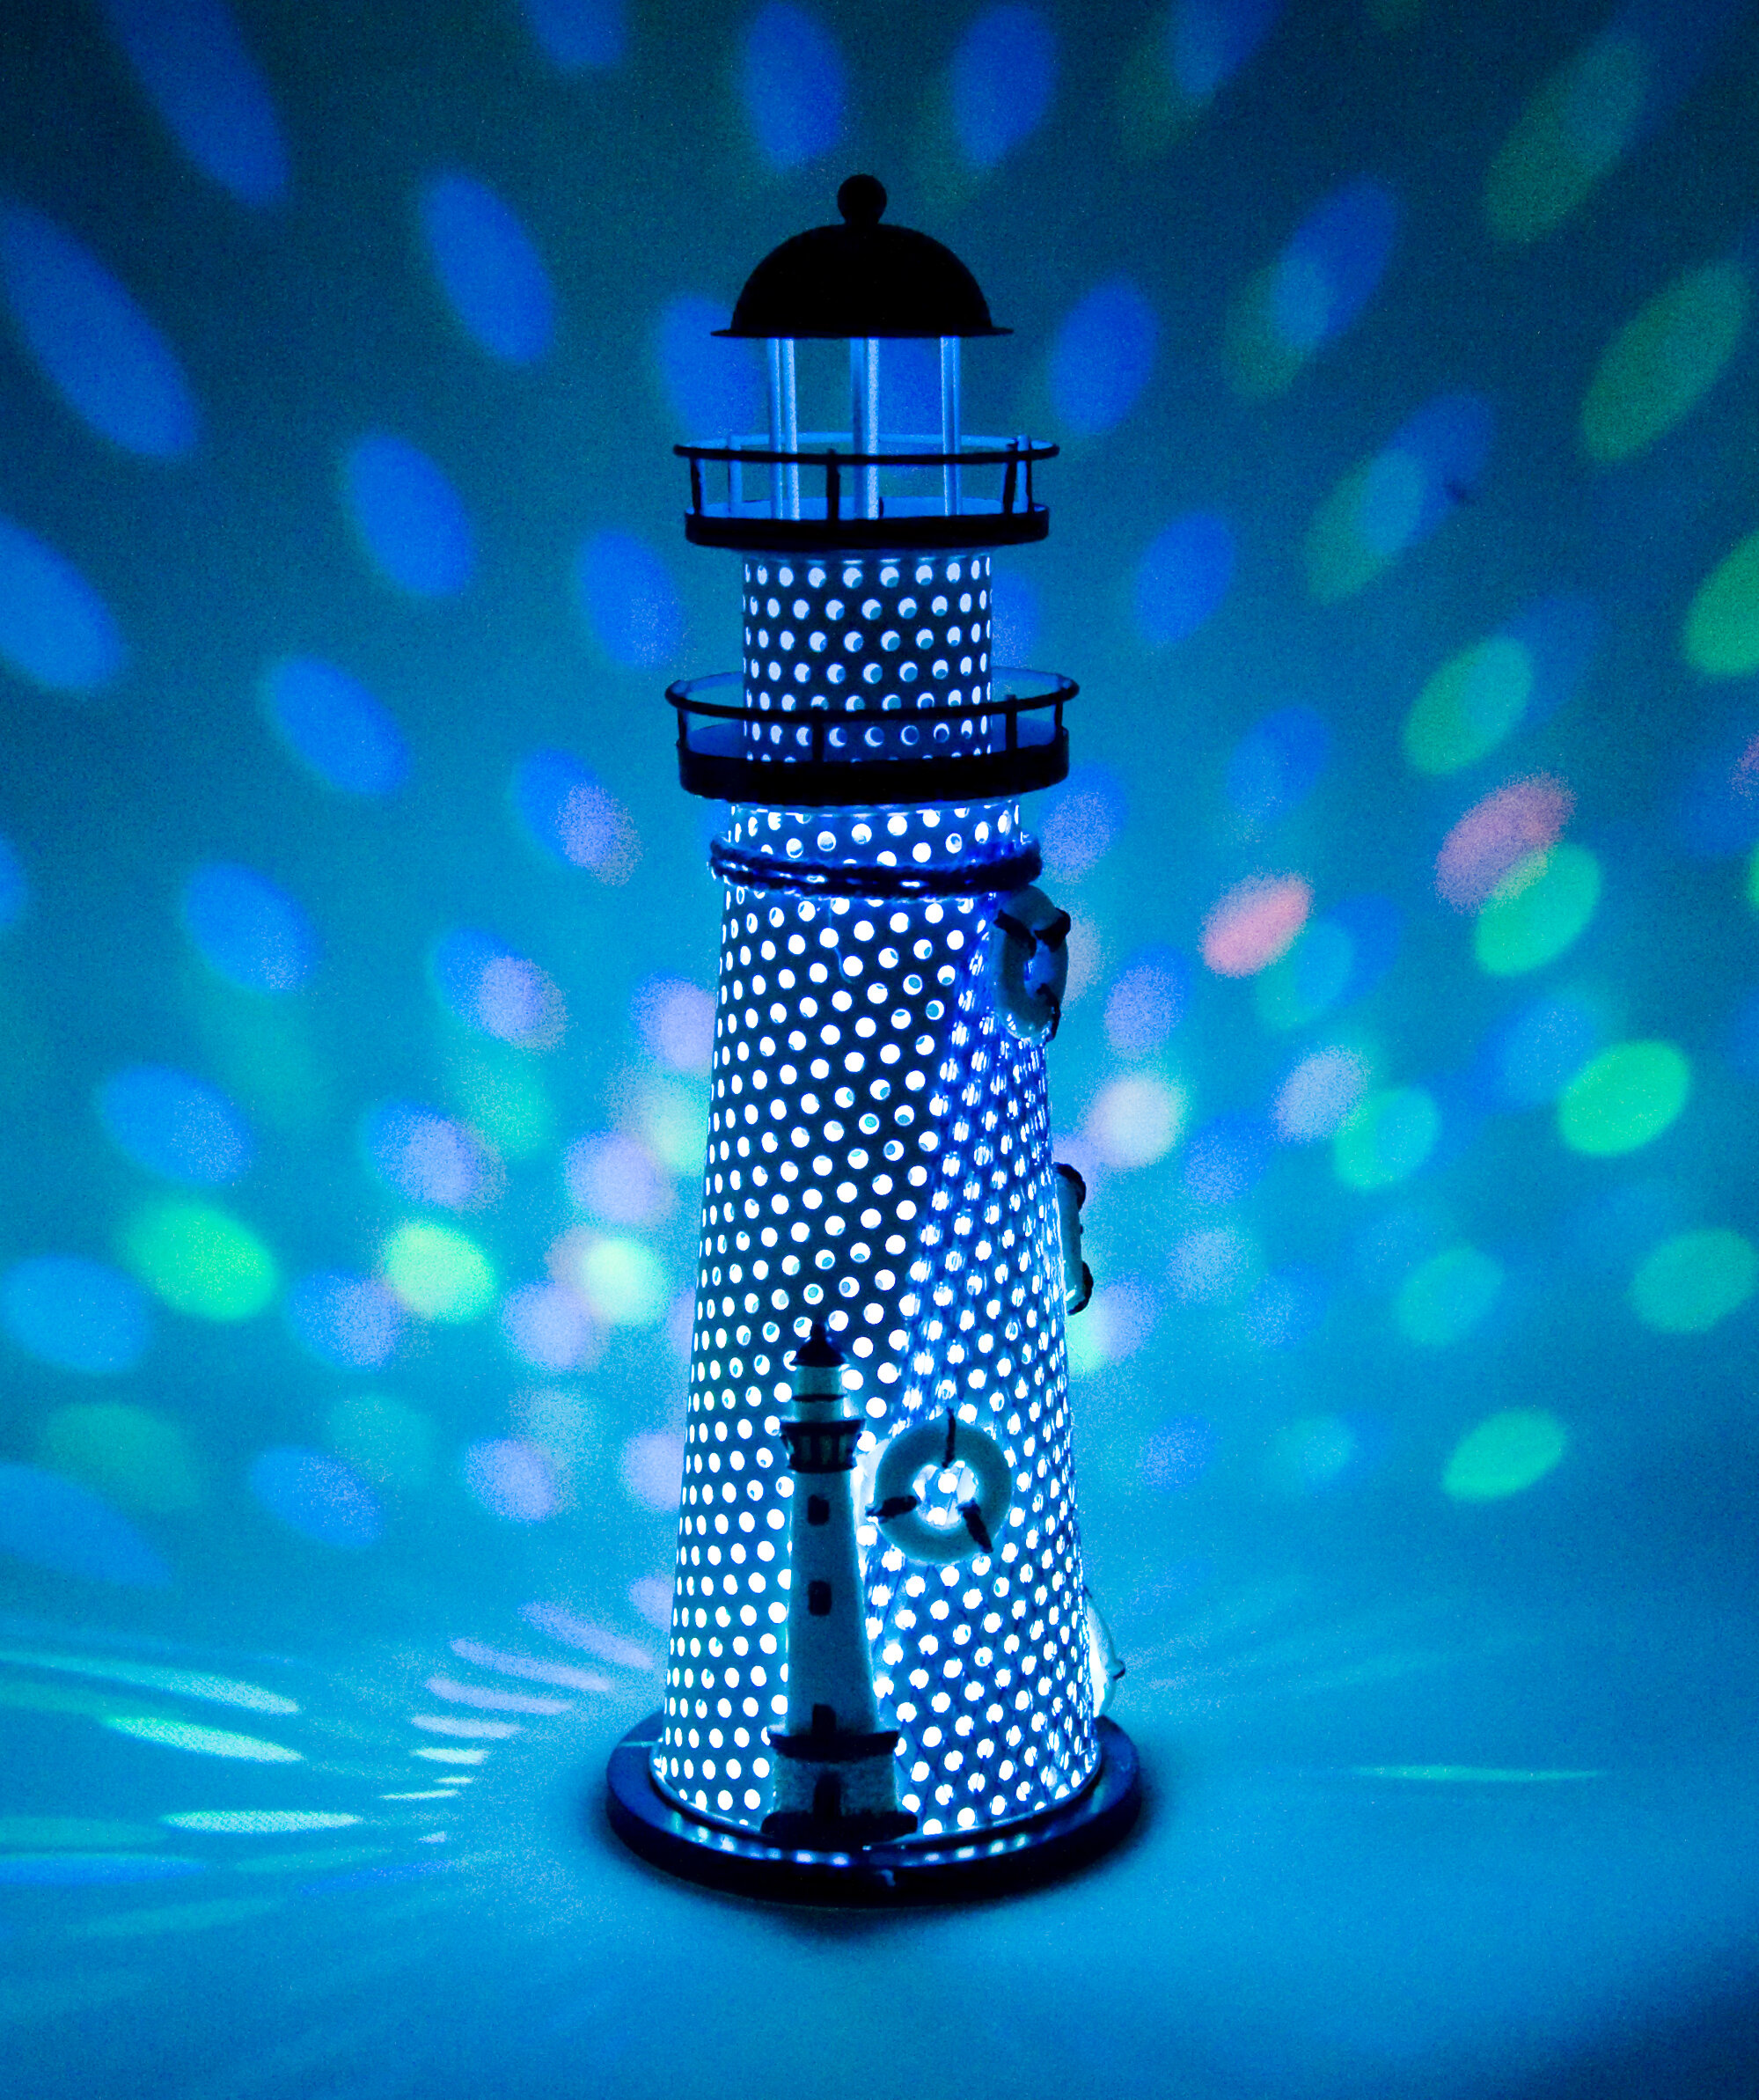 16 Color Options Lighthouse Nautical Light House Night Light Up LED Free Engraved Custom Name Personalized Strength Safety Hope Desk Table Lamp Room Home Decor Its Wow Great Gift with Remote